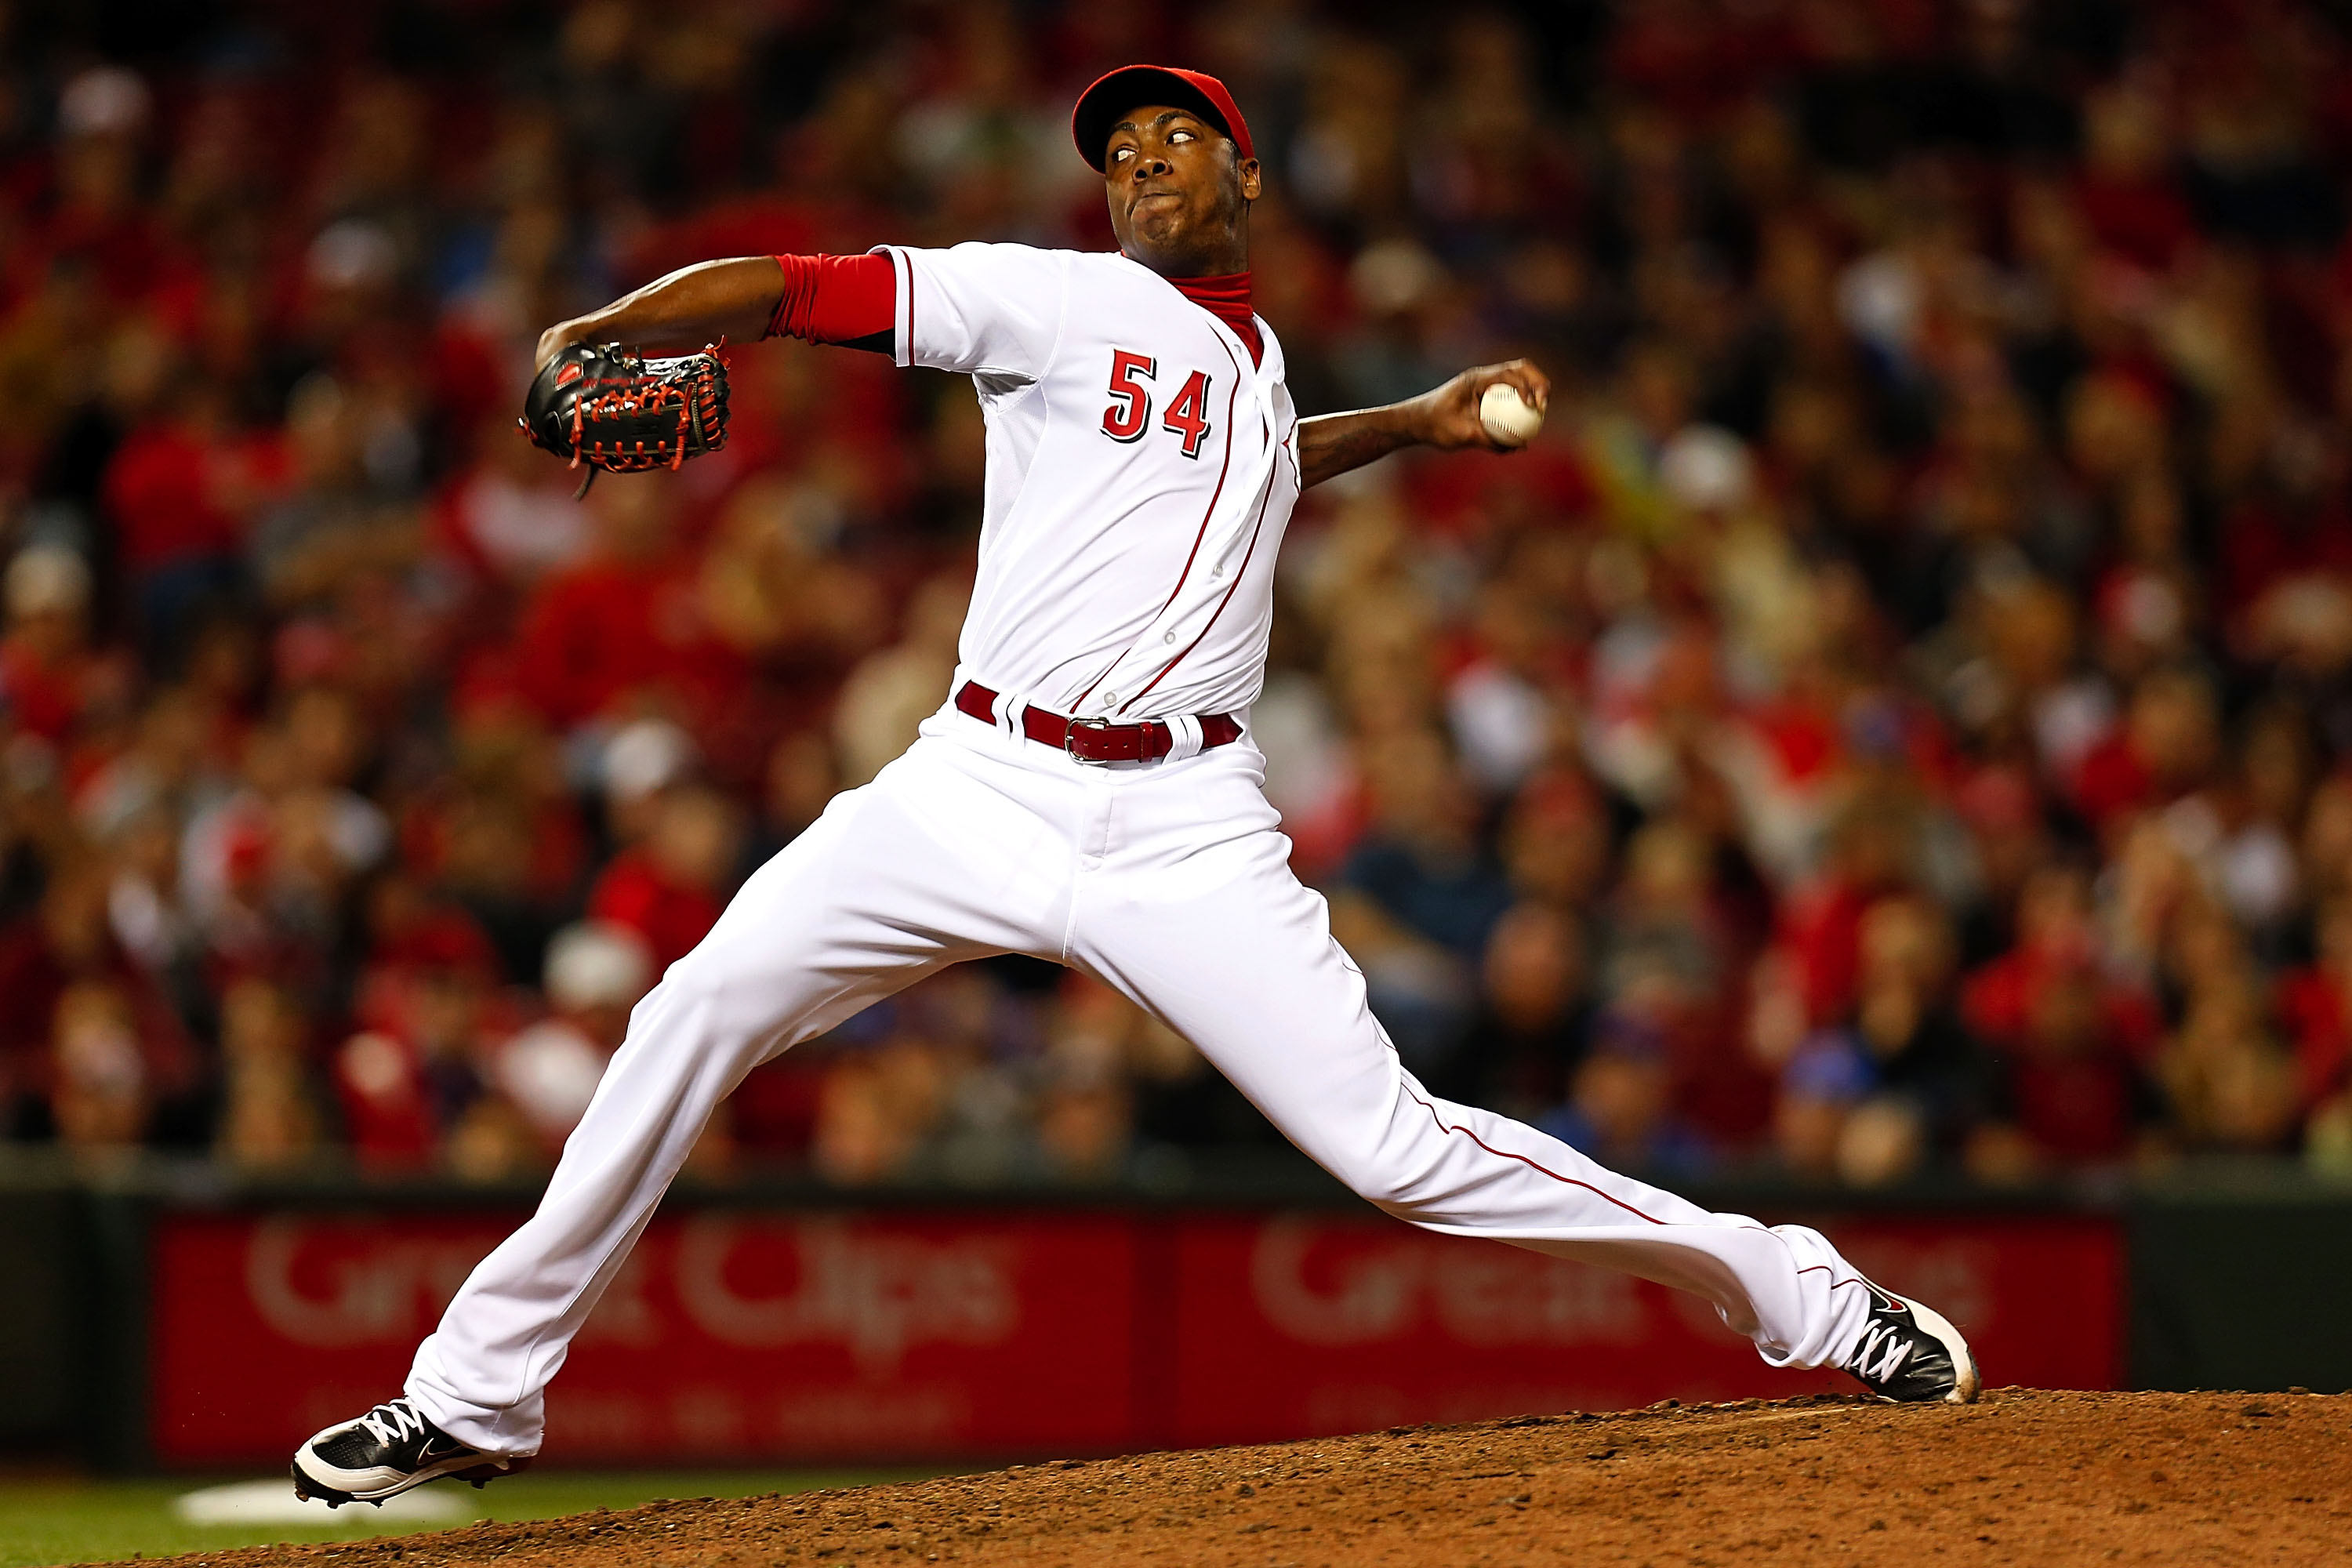 Loss of Chapman could affect NL Central